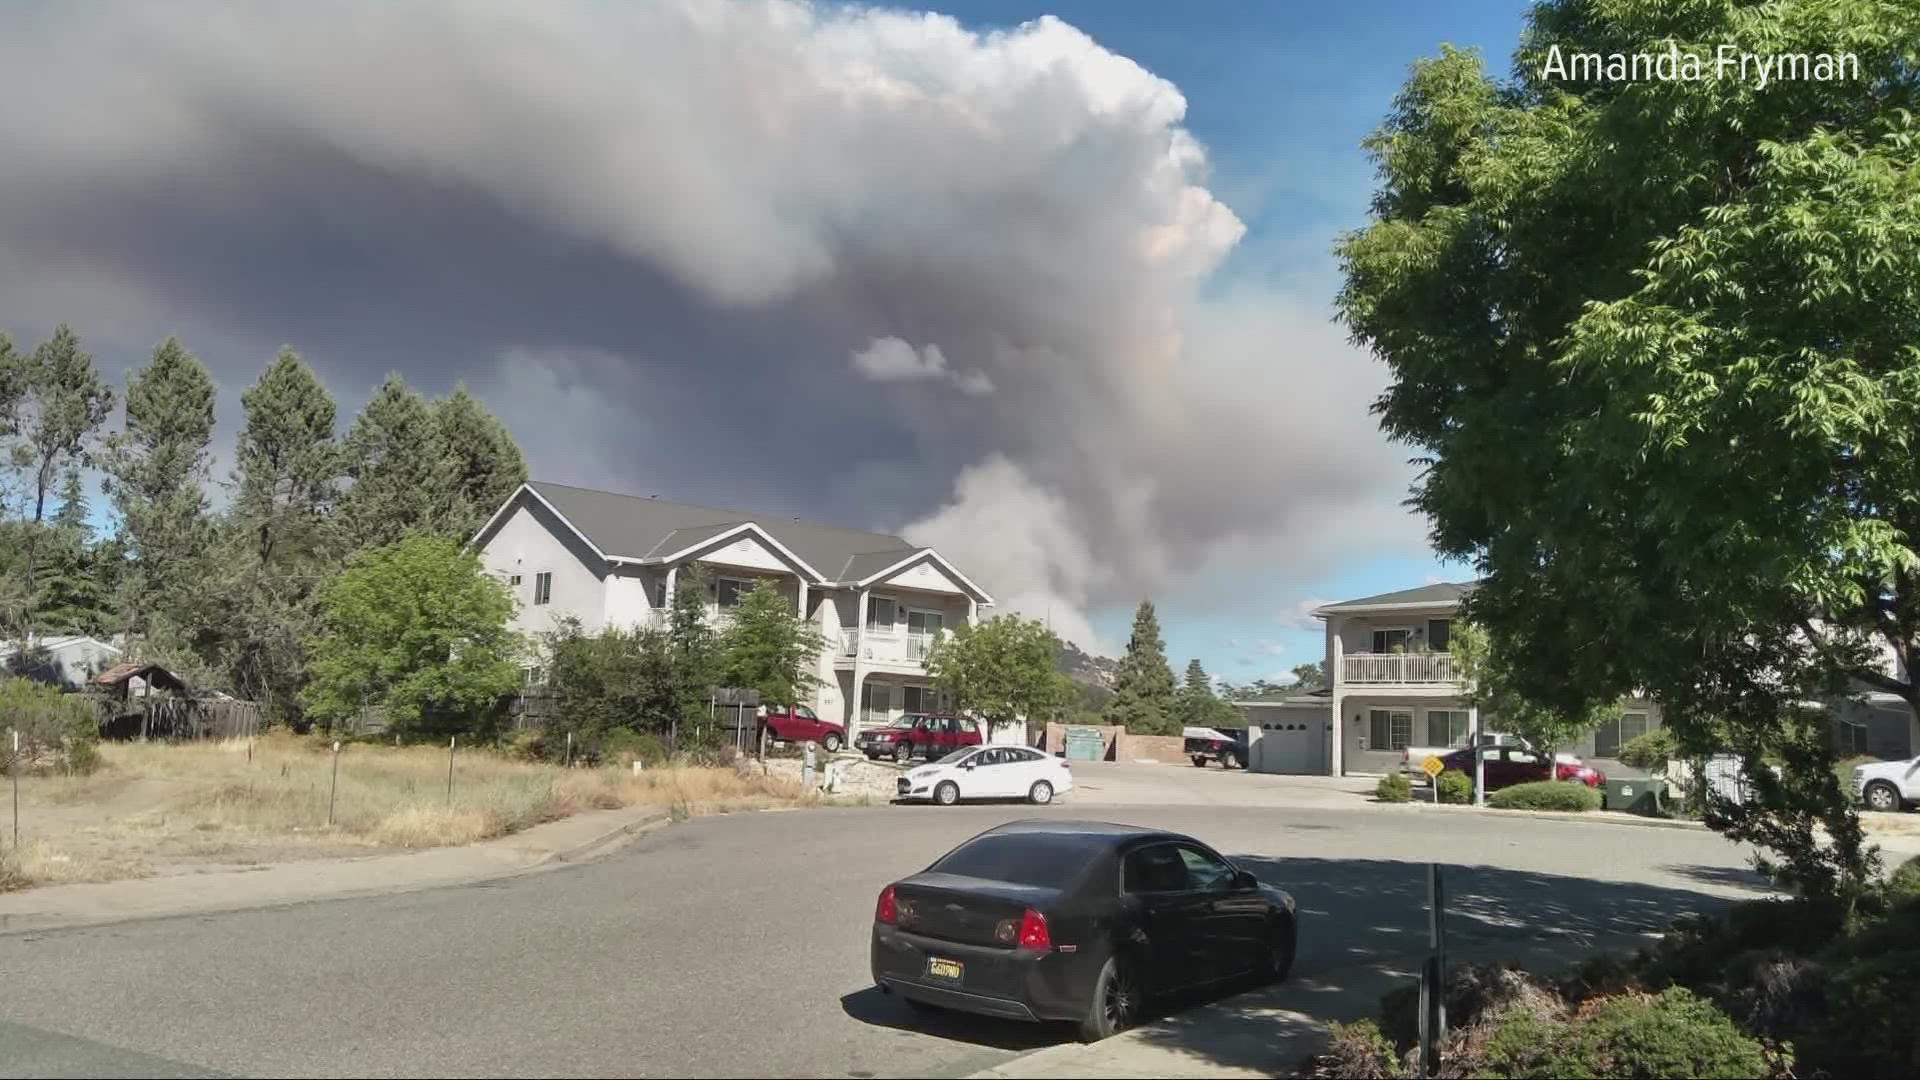 The Electra Fire is spreading fast south of Jackson in Amador County, so much so evacuation orders and warnings are now in effect in some areas.